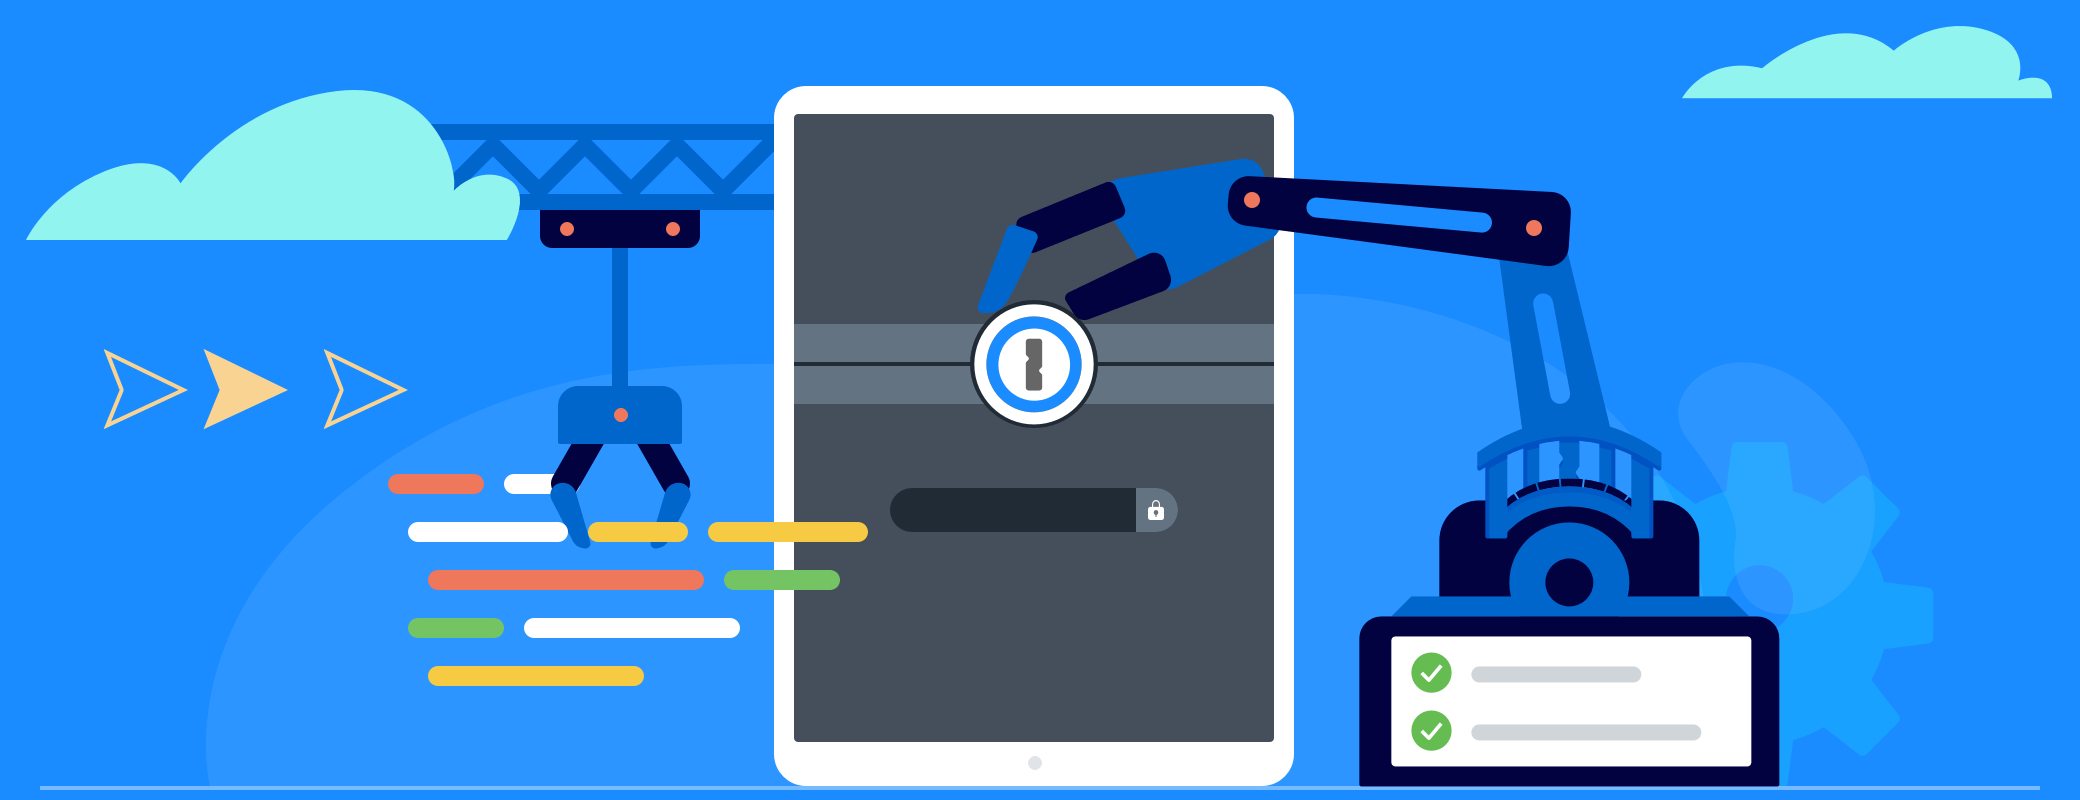 Use the SCIM bridge and the command-line tool to automate 1Password Business